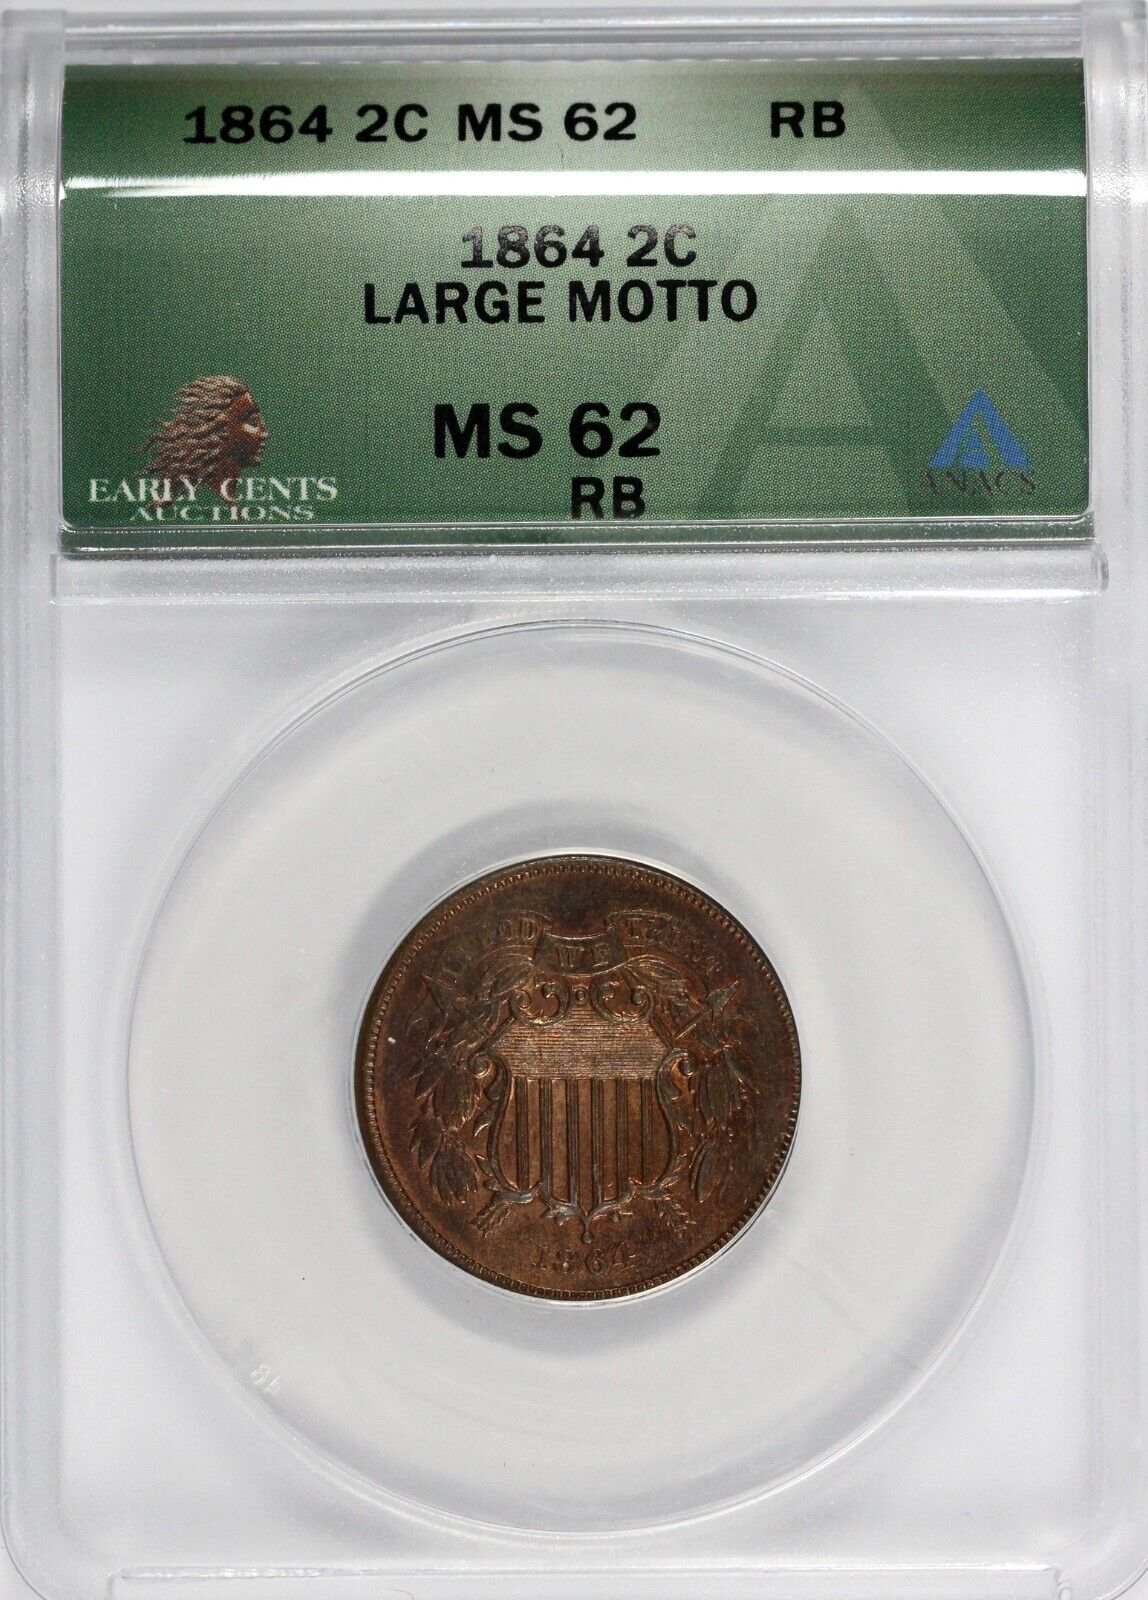 1864 2c Large Motto Two Cent Piece ANACS MS 62 RB